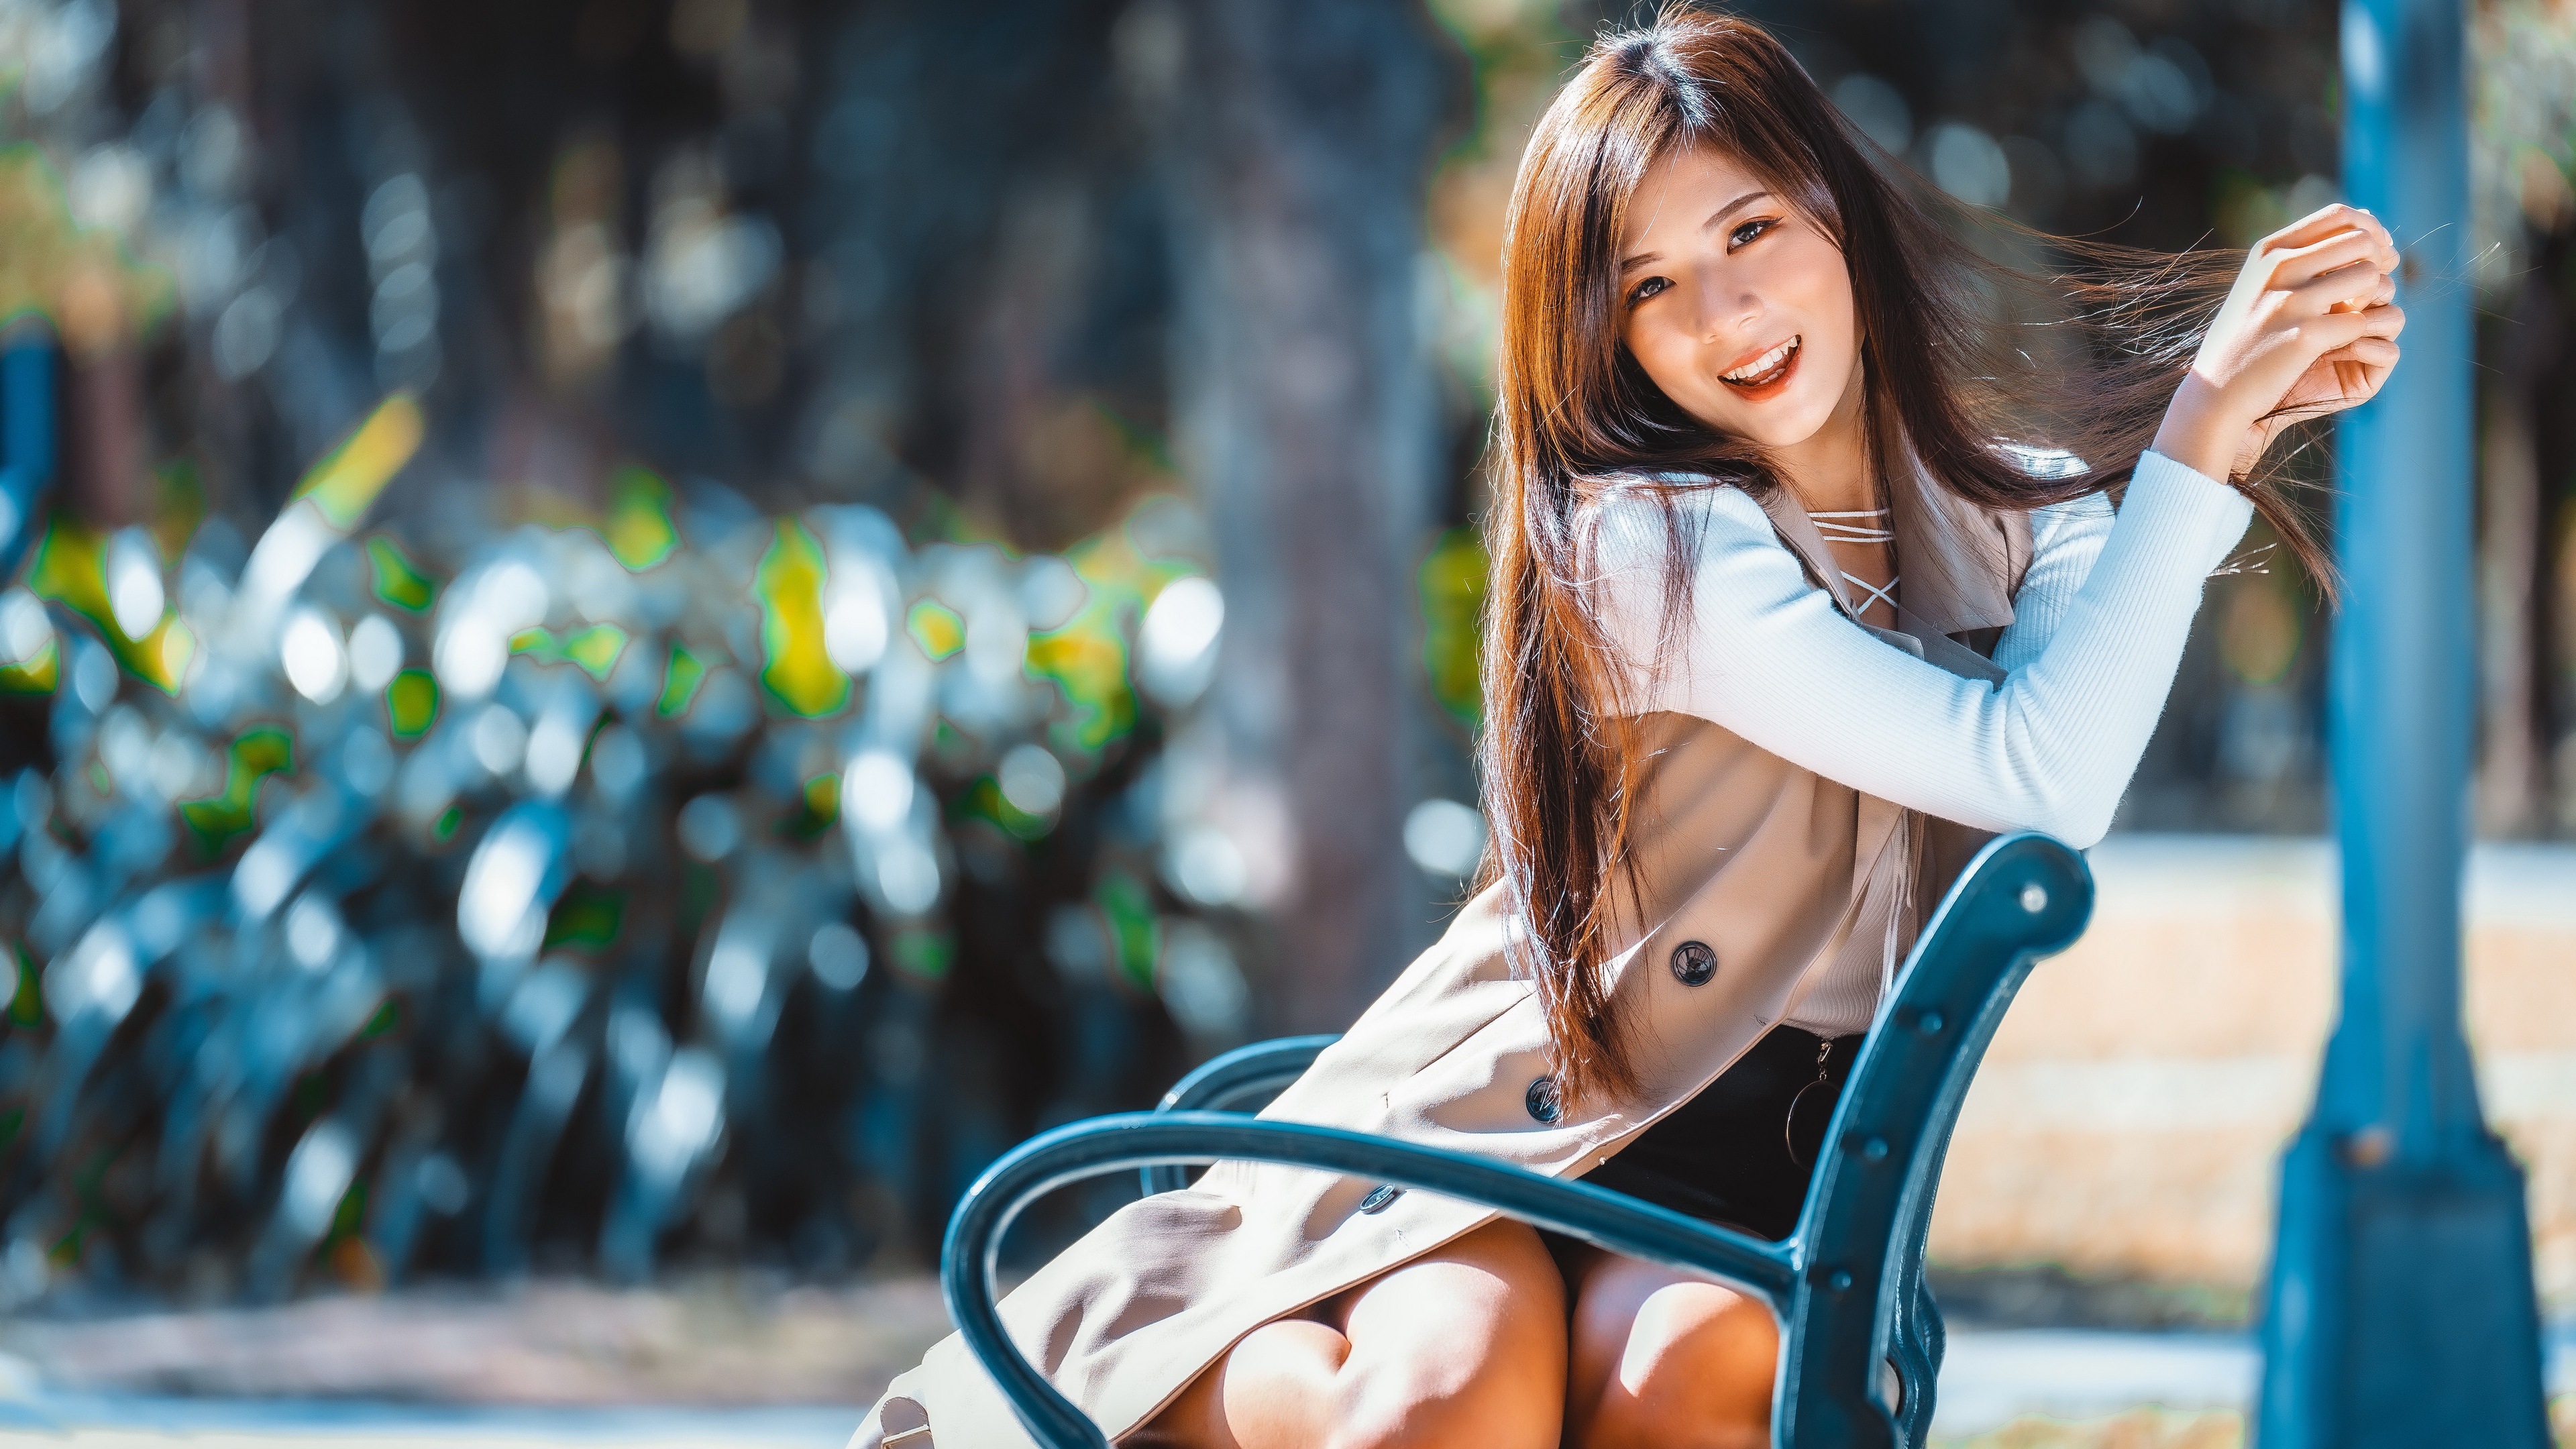 People 3840x2160 Asian women model happy smiling bench women outdoors looking at viewer